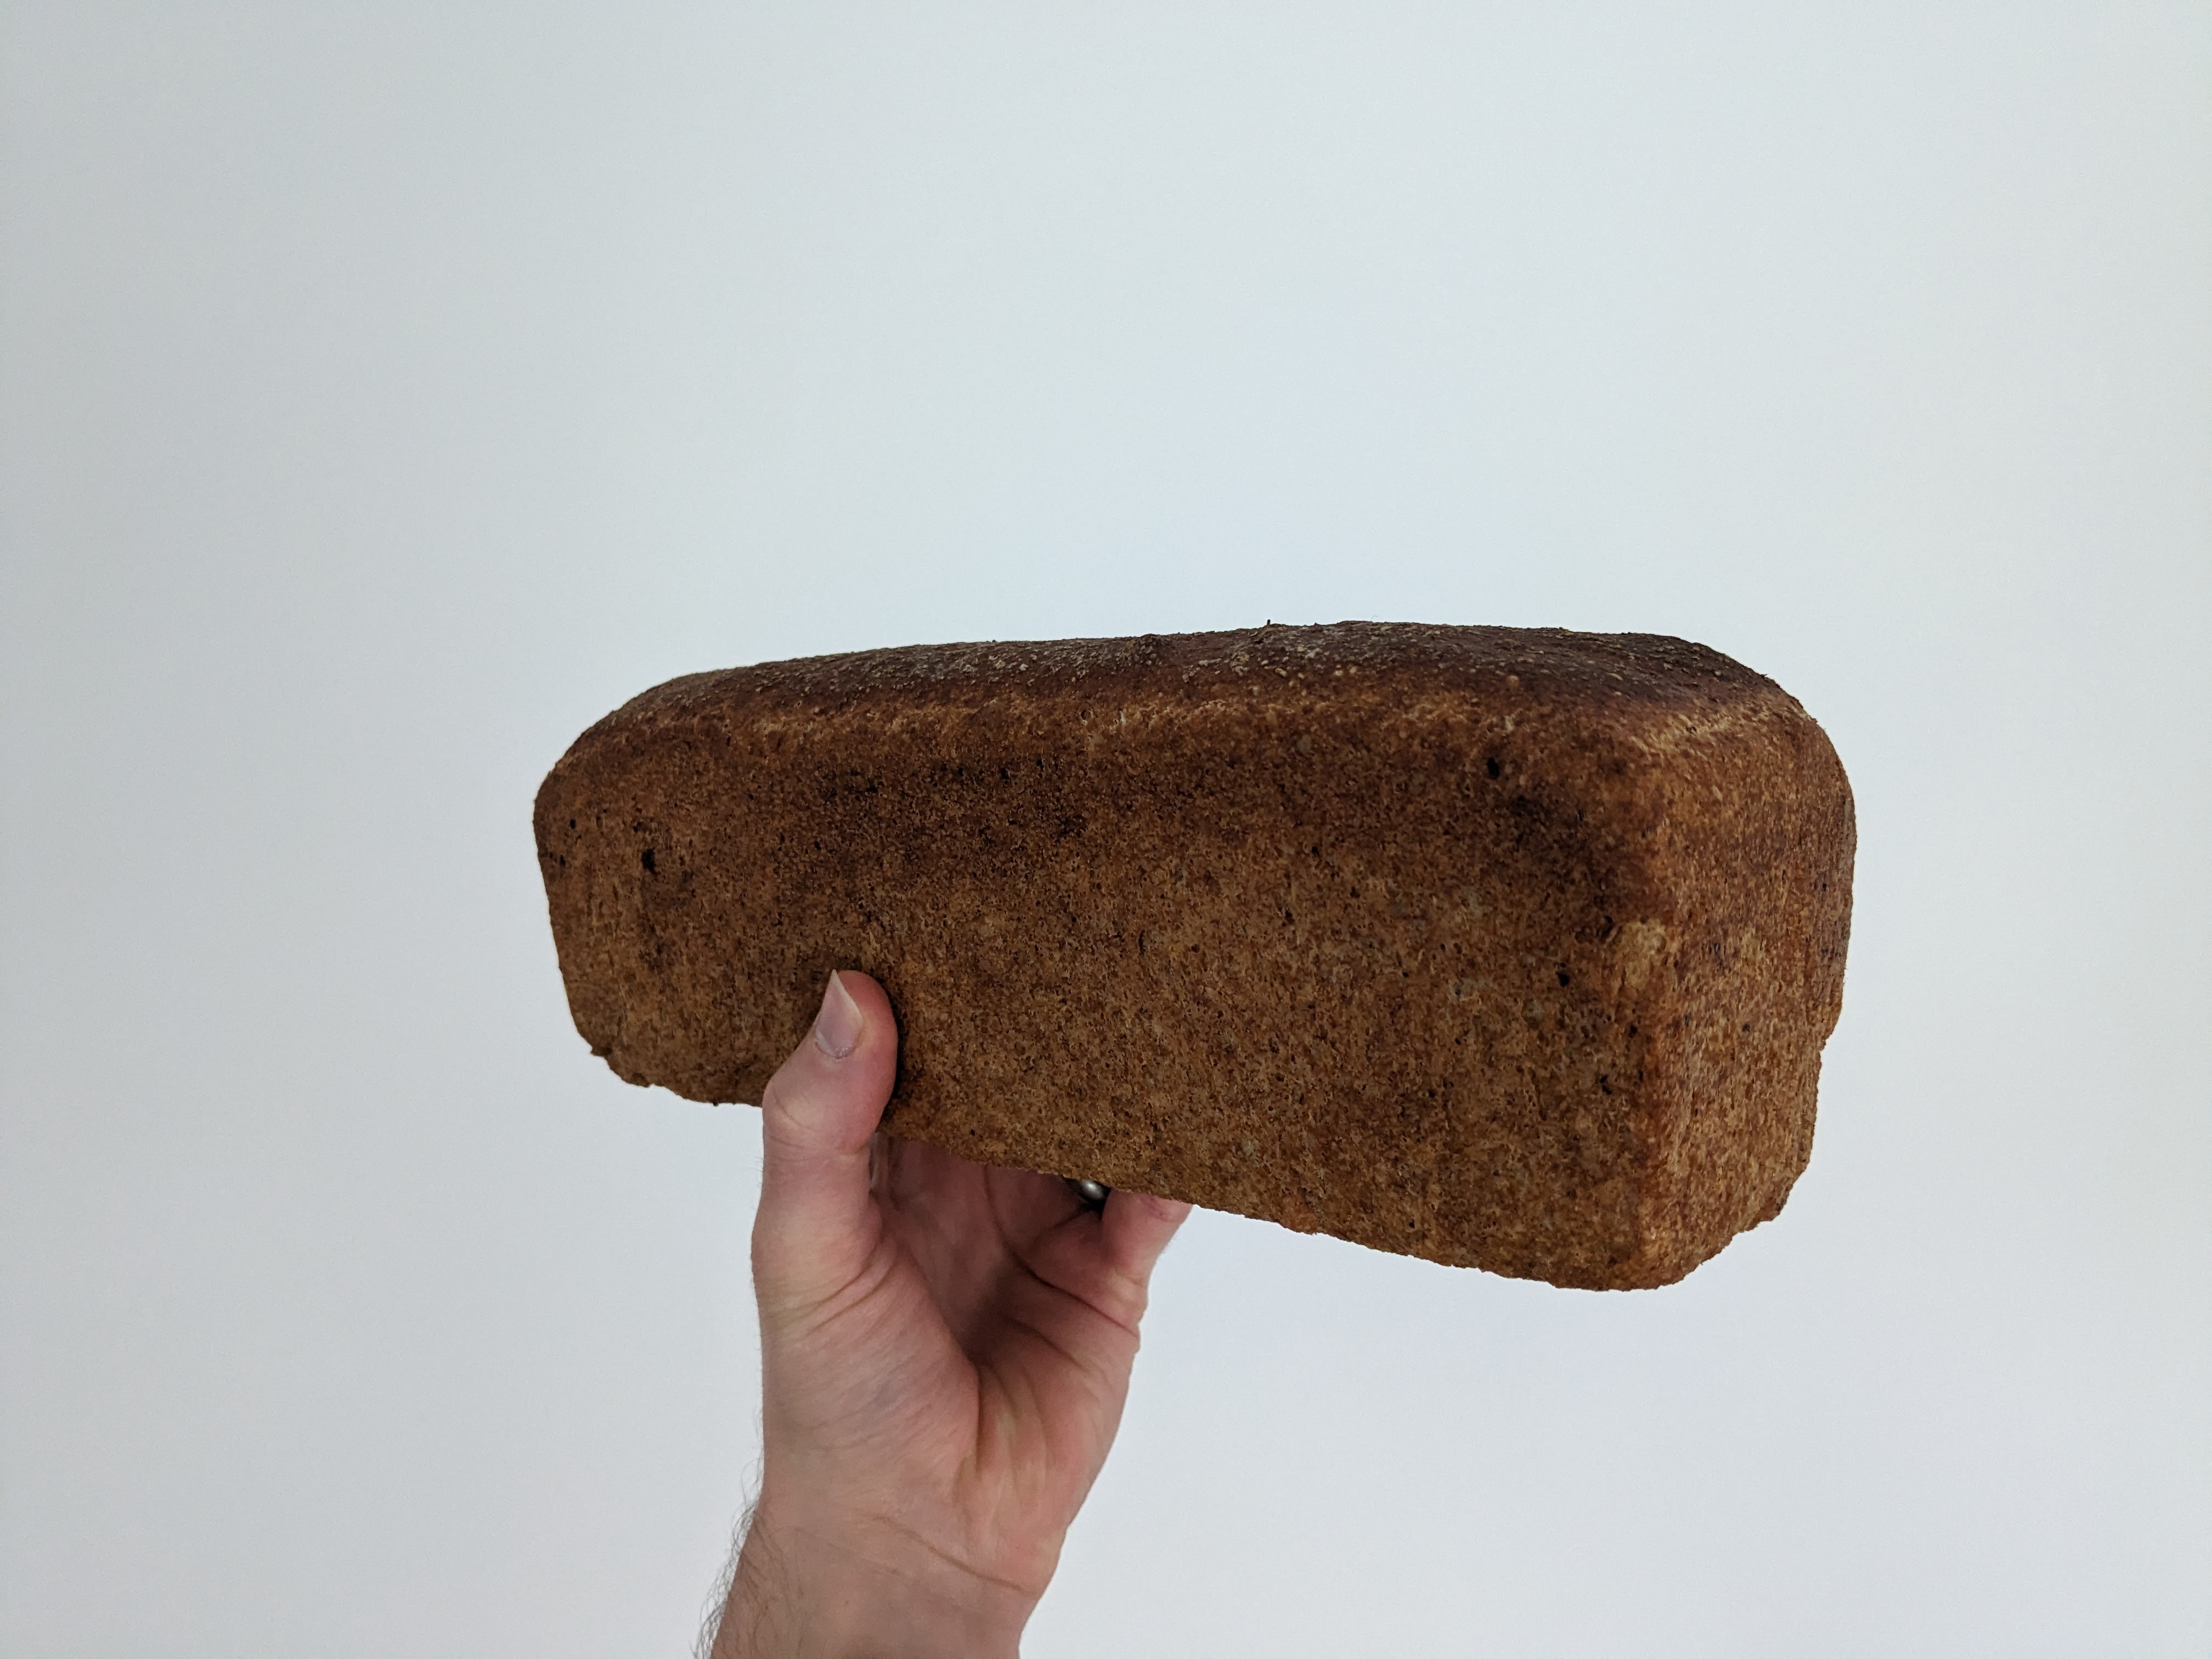 An image of a bread called “Bread ahead: 75% wholemeal pan loaf”